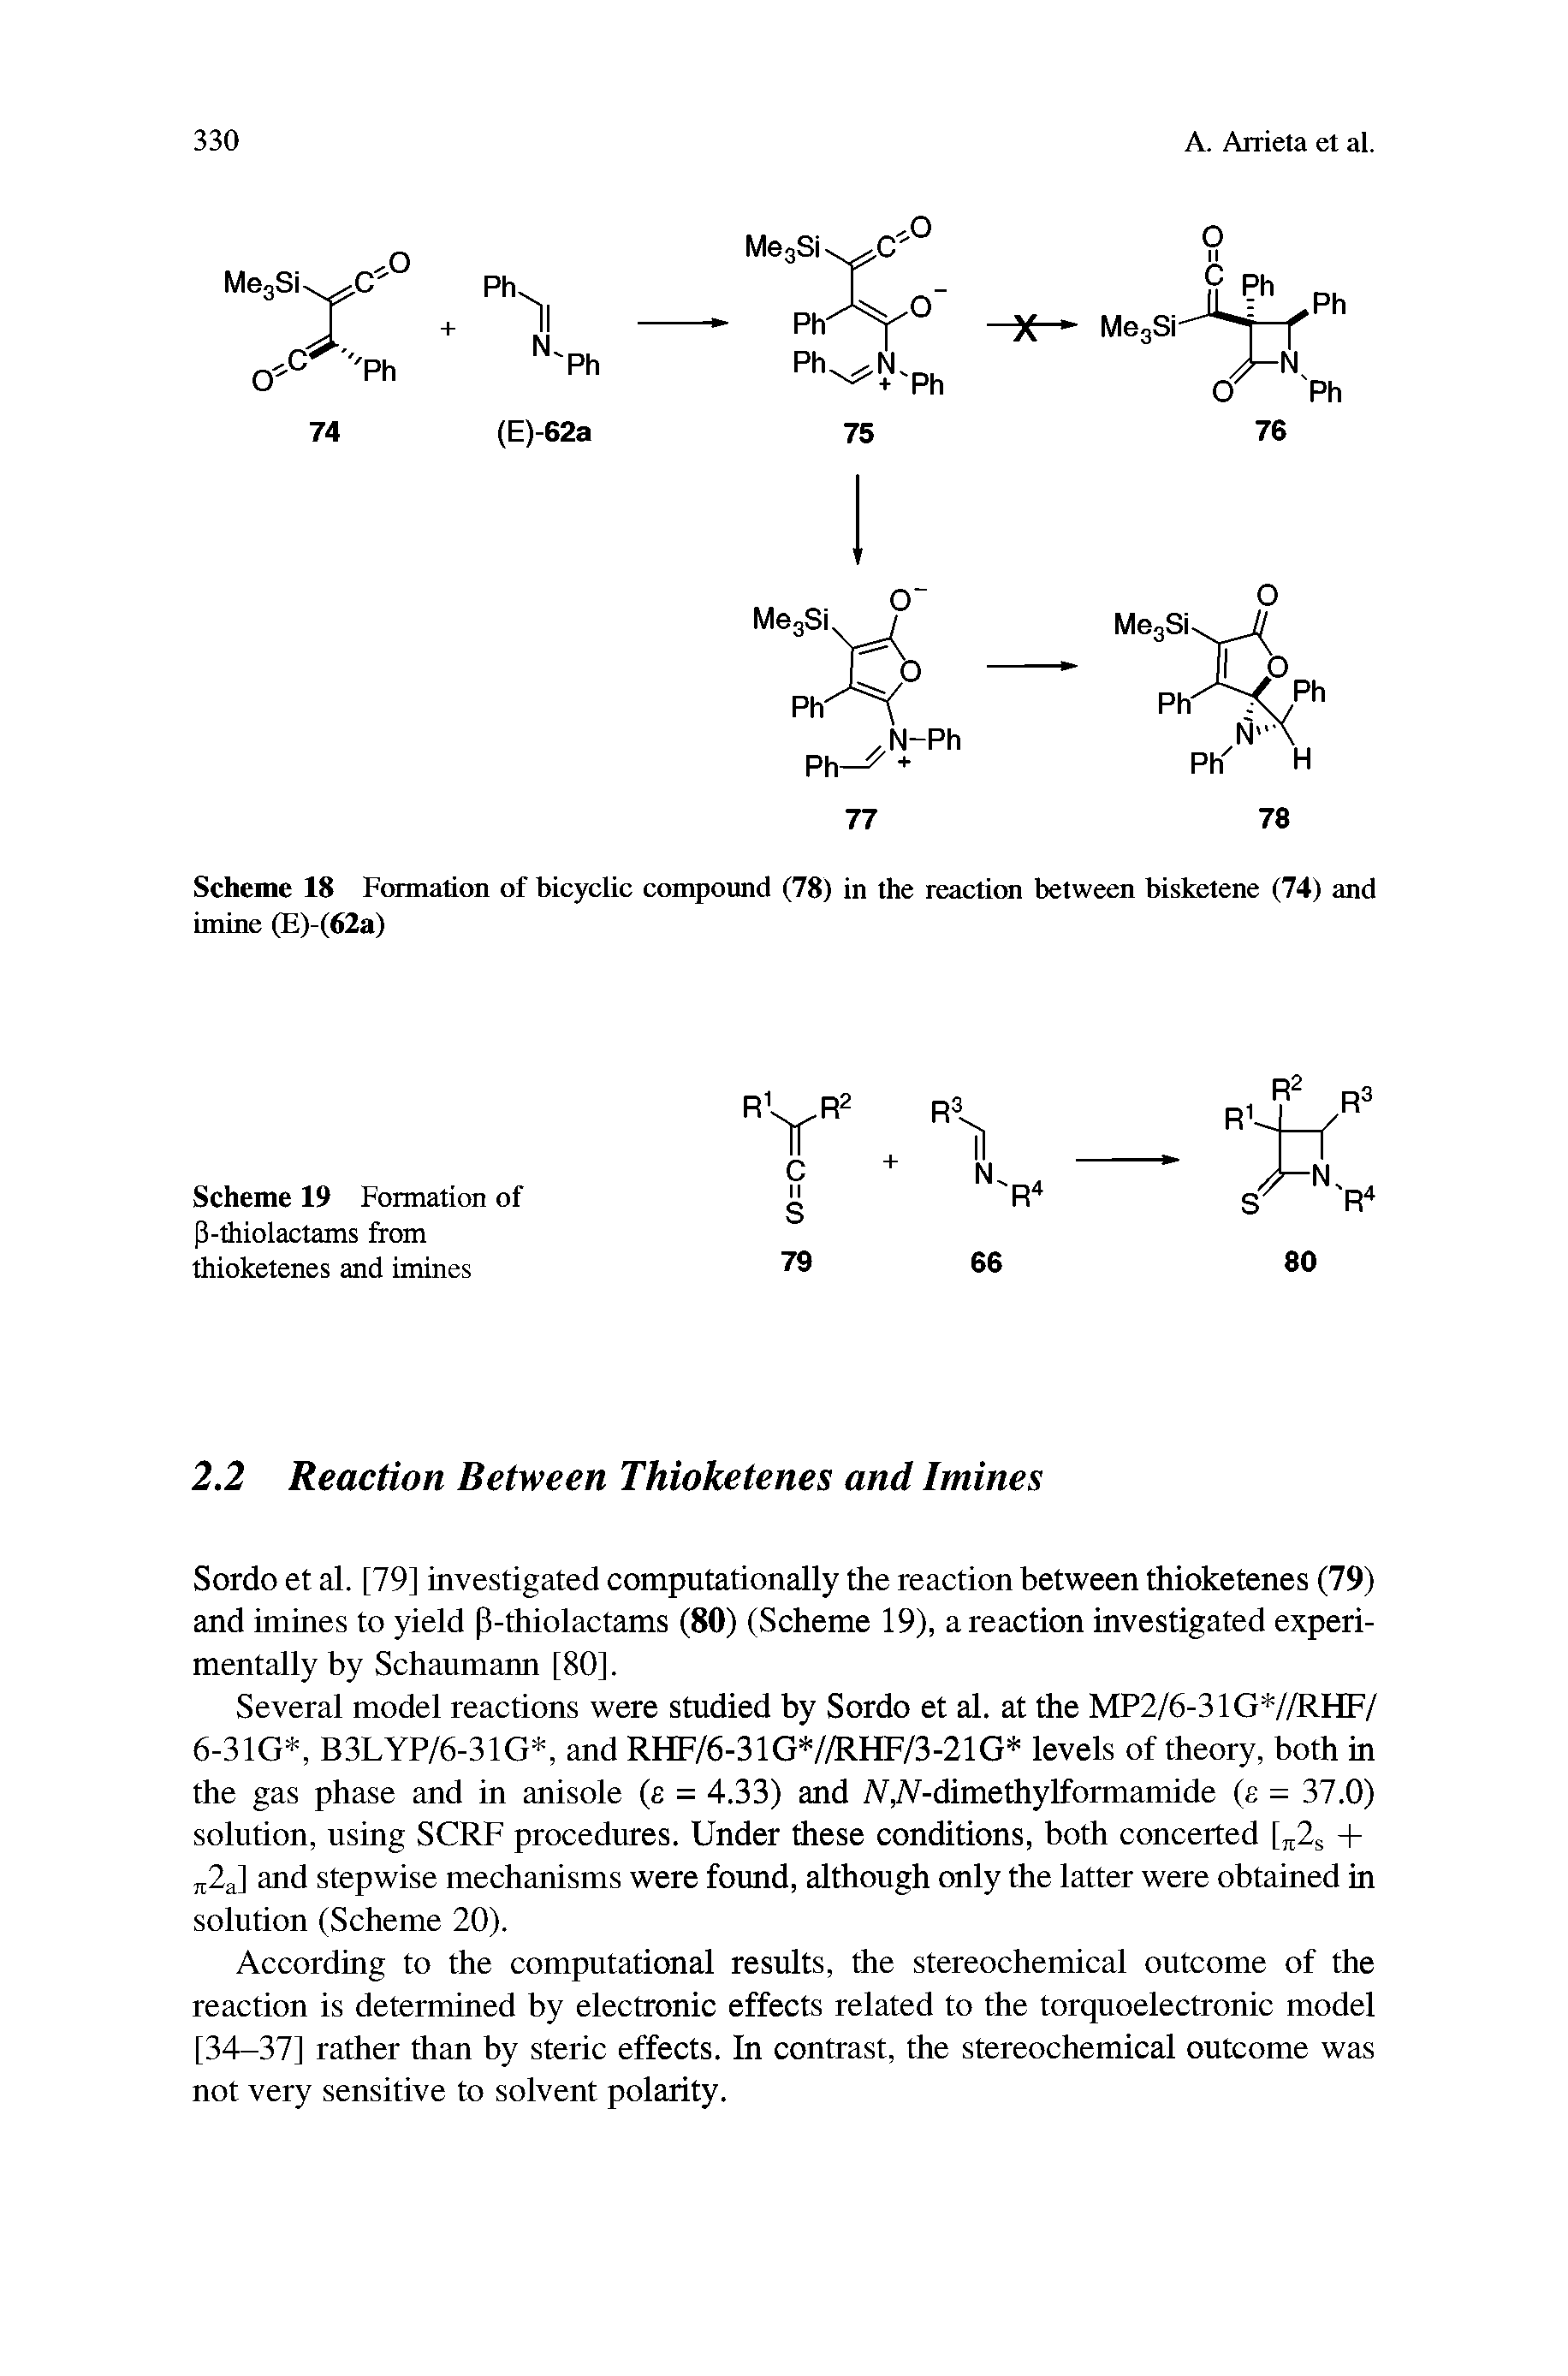 Scheme 19 Formation of (3-thiolactams from thioketenes and imines...